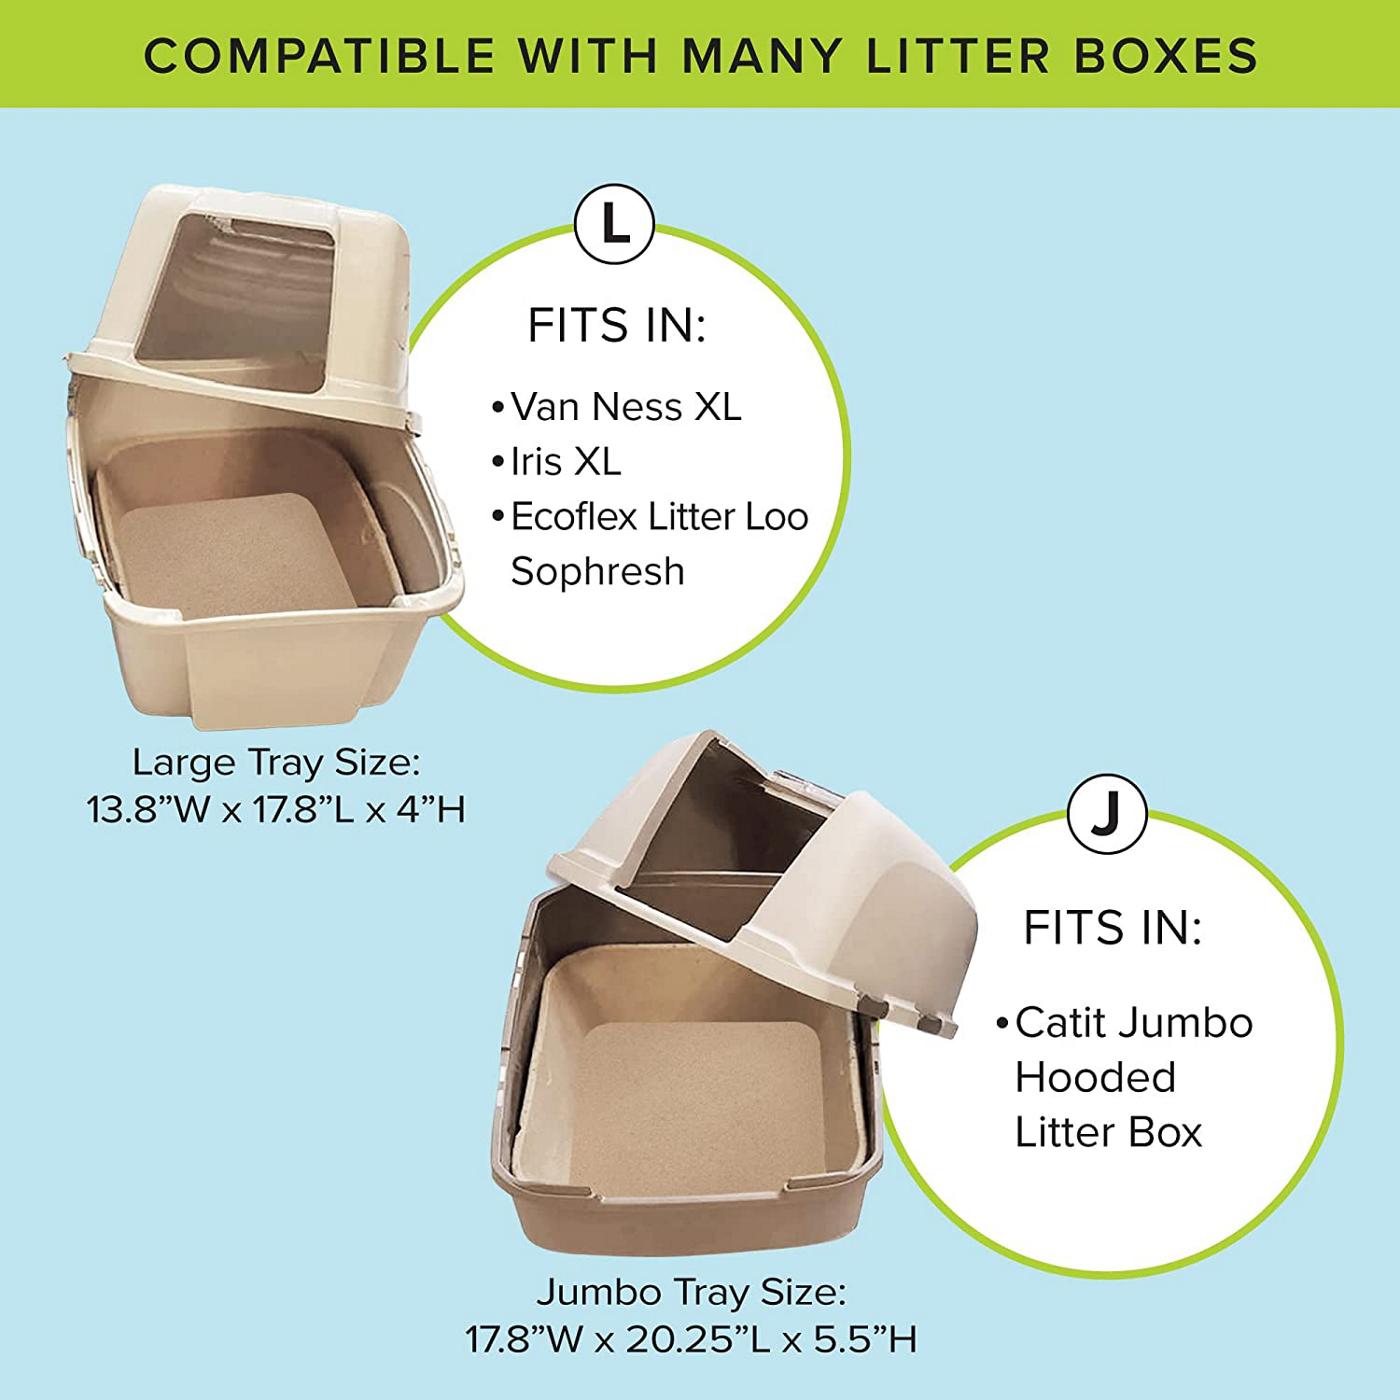 Kitty Sift Disposable Litter Box; image 3 of 4